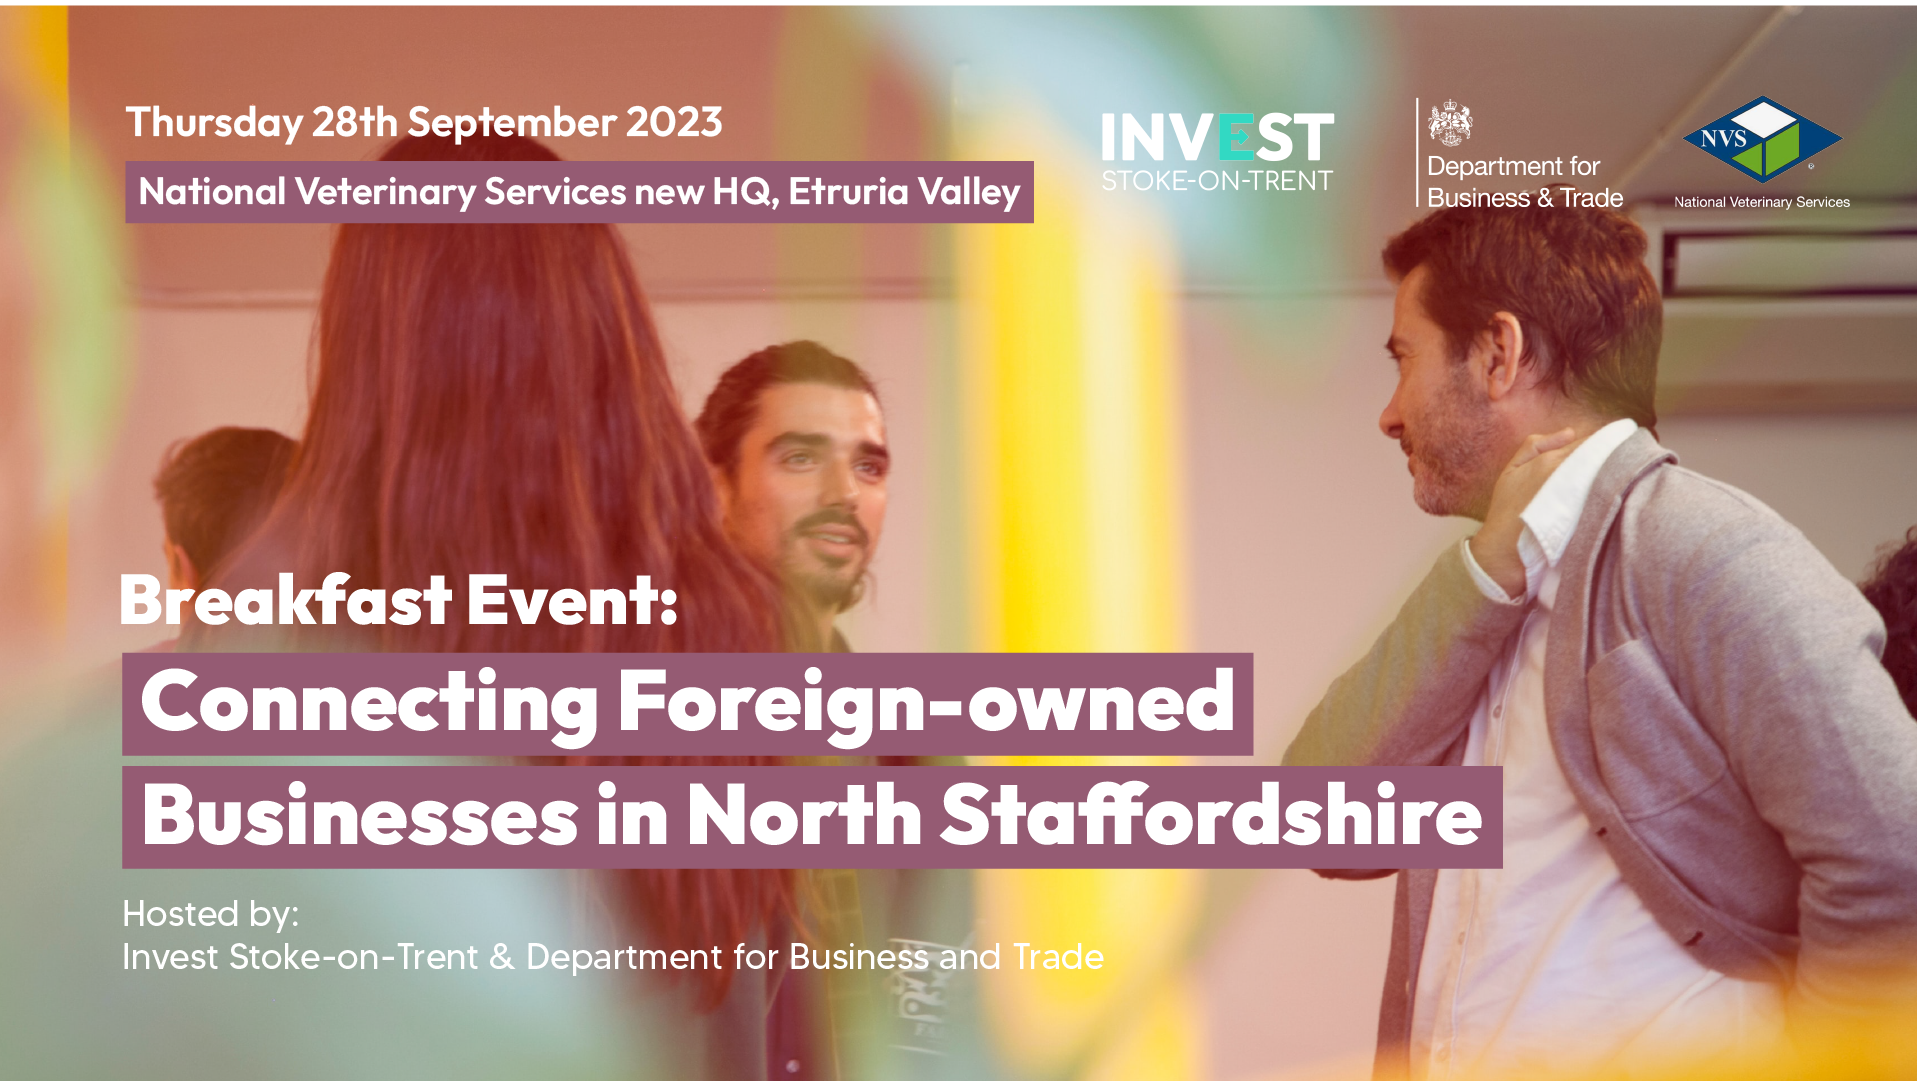 Invest Stoke-on-Trent - Connecting Foreign-owned Businesses in North Staffordshire Event